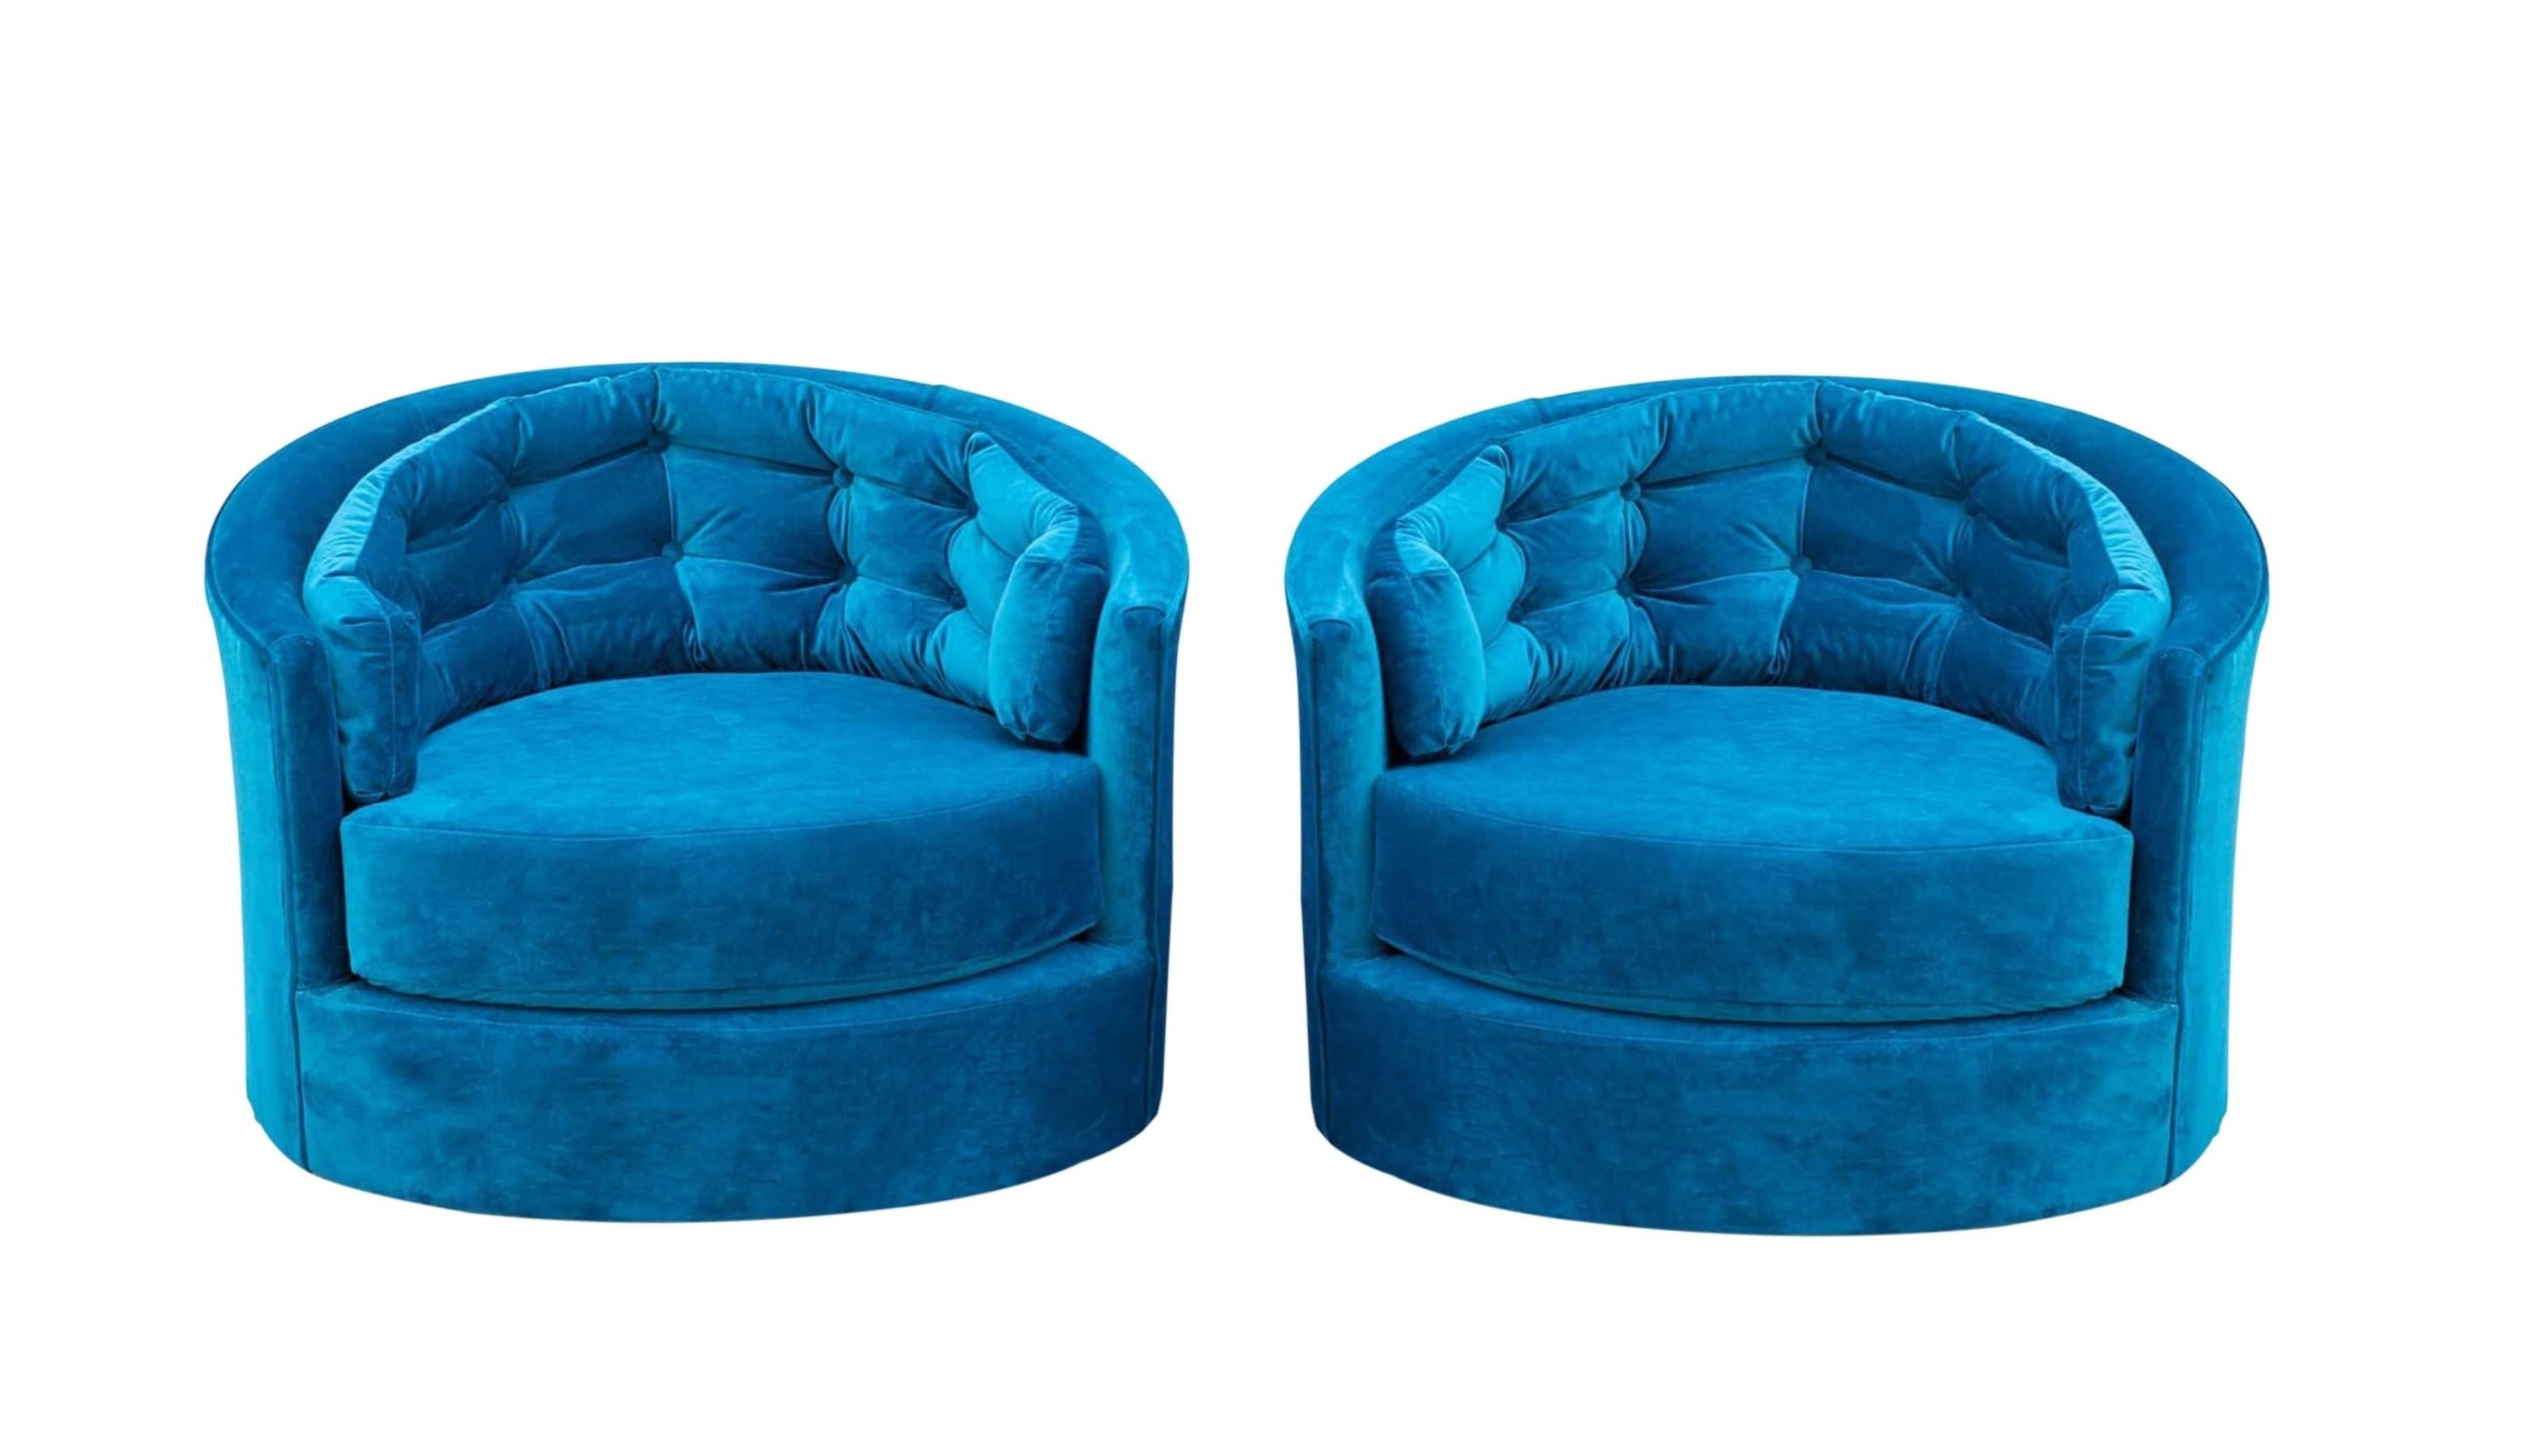 Outstanding design! pair of large-scale swivel chairs in the style of Milo Baughman from the 1970s. Fully restored, the barrel design features luxurious tufting along the curved back and armrests and removable seat cushion. Upholstered in sumptuous